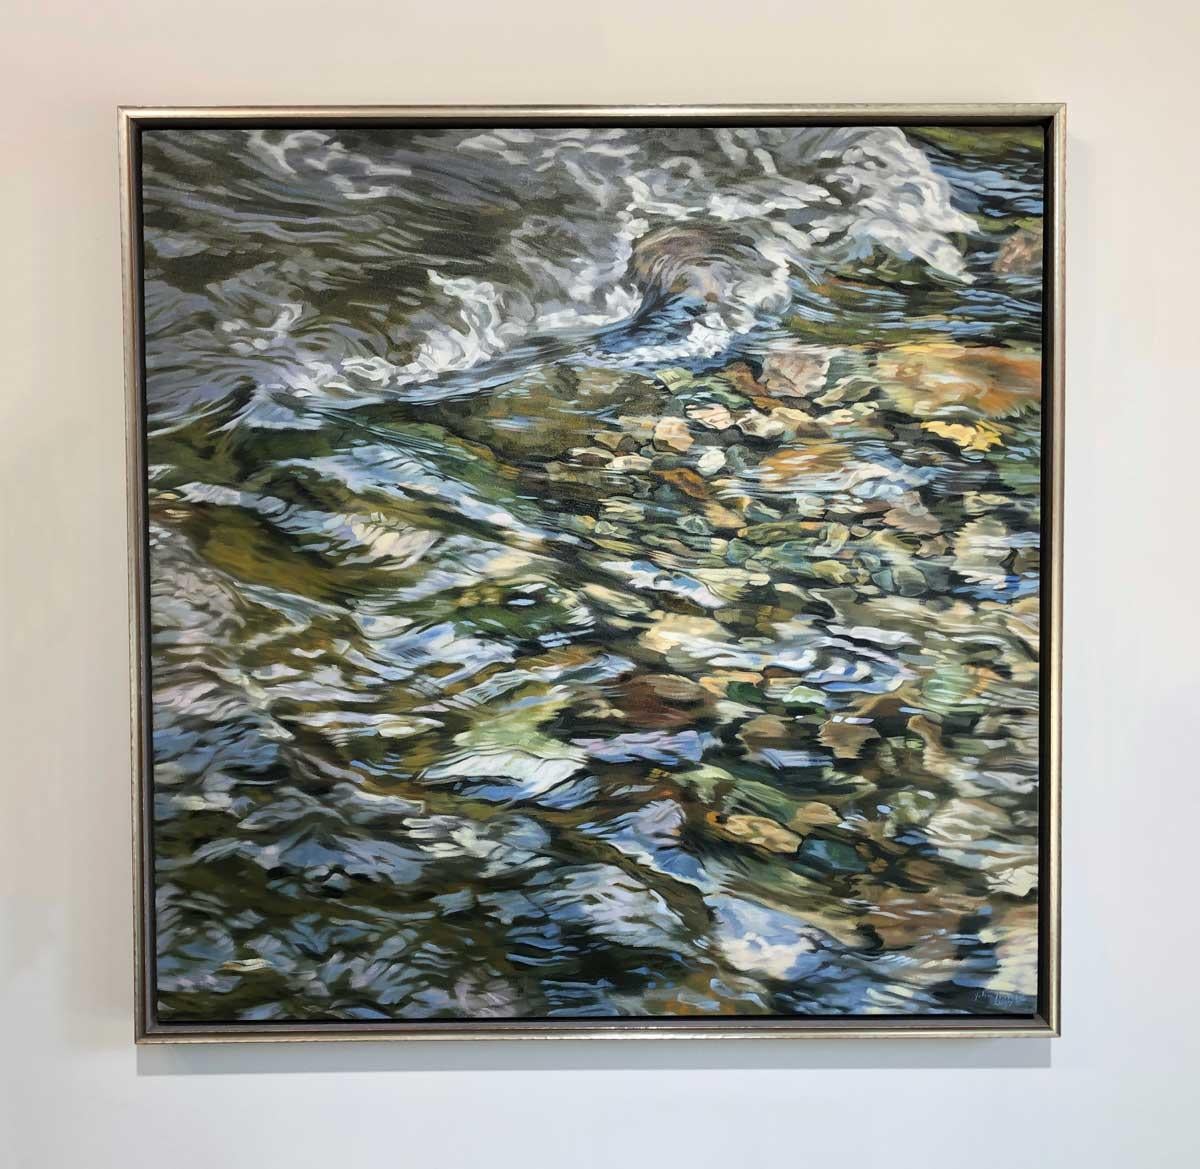 This original realistic oil painting on linen is highly detailed, close up view of river water running over small, colorful rocks. The artist seamlessly depicts the visible shapes, textures, and earthy colors of the rocks beneath the water, which